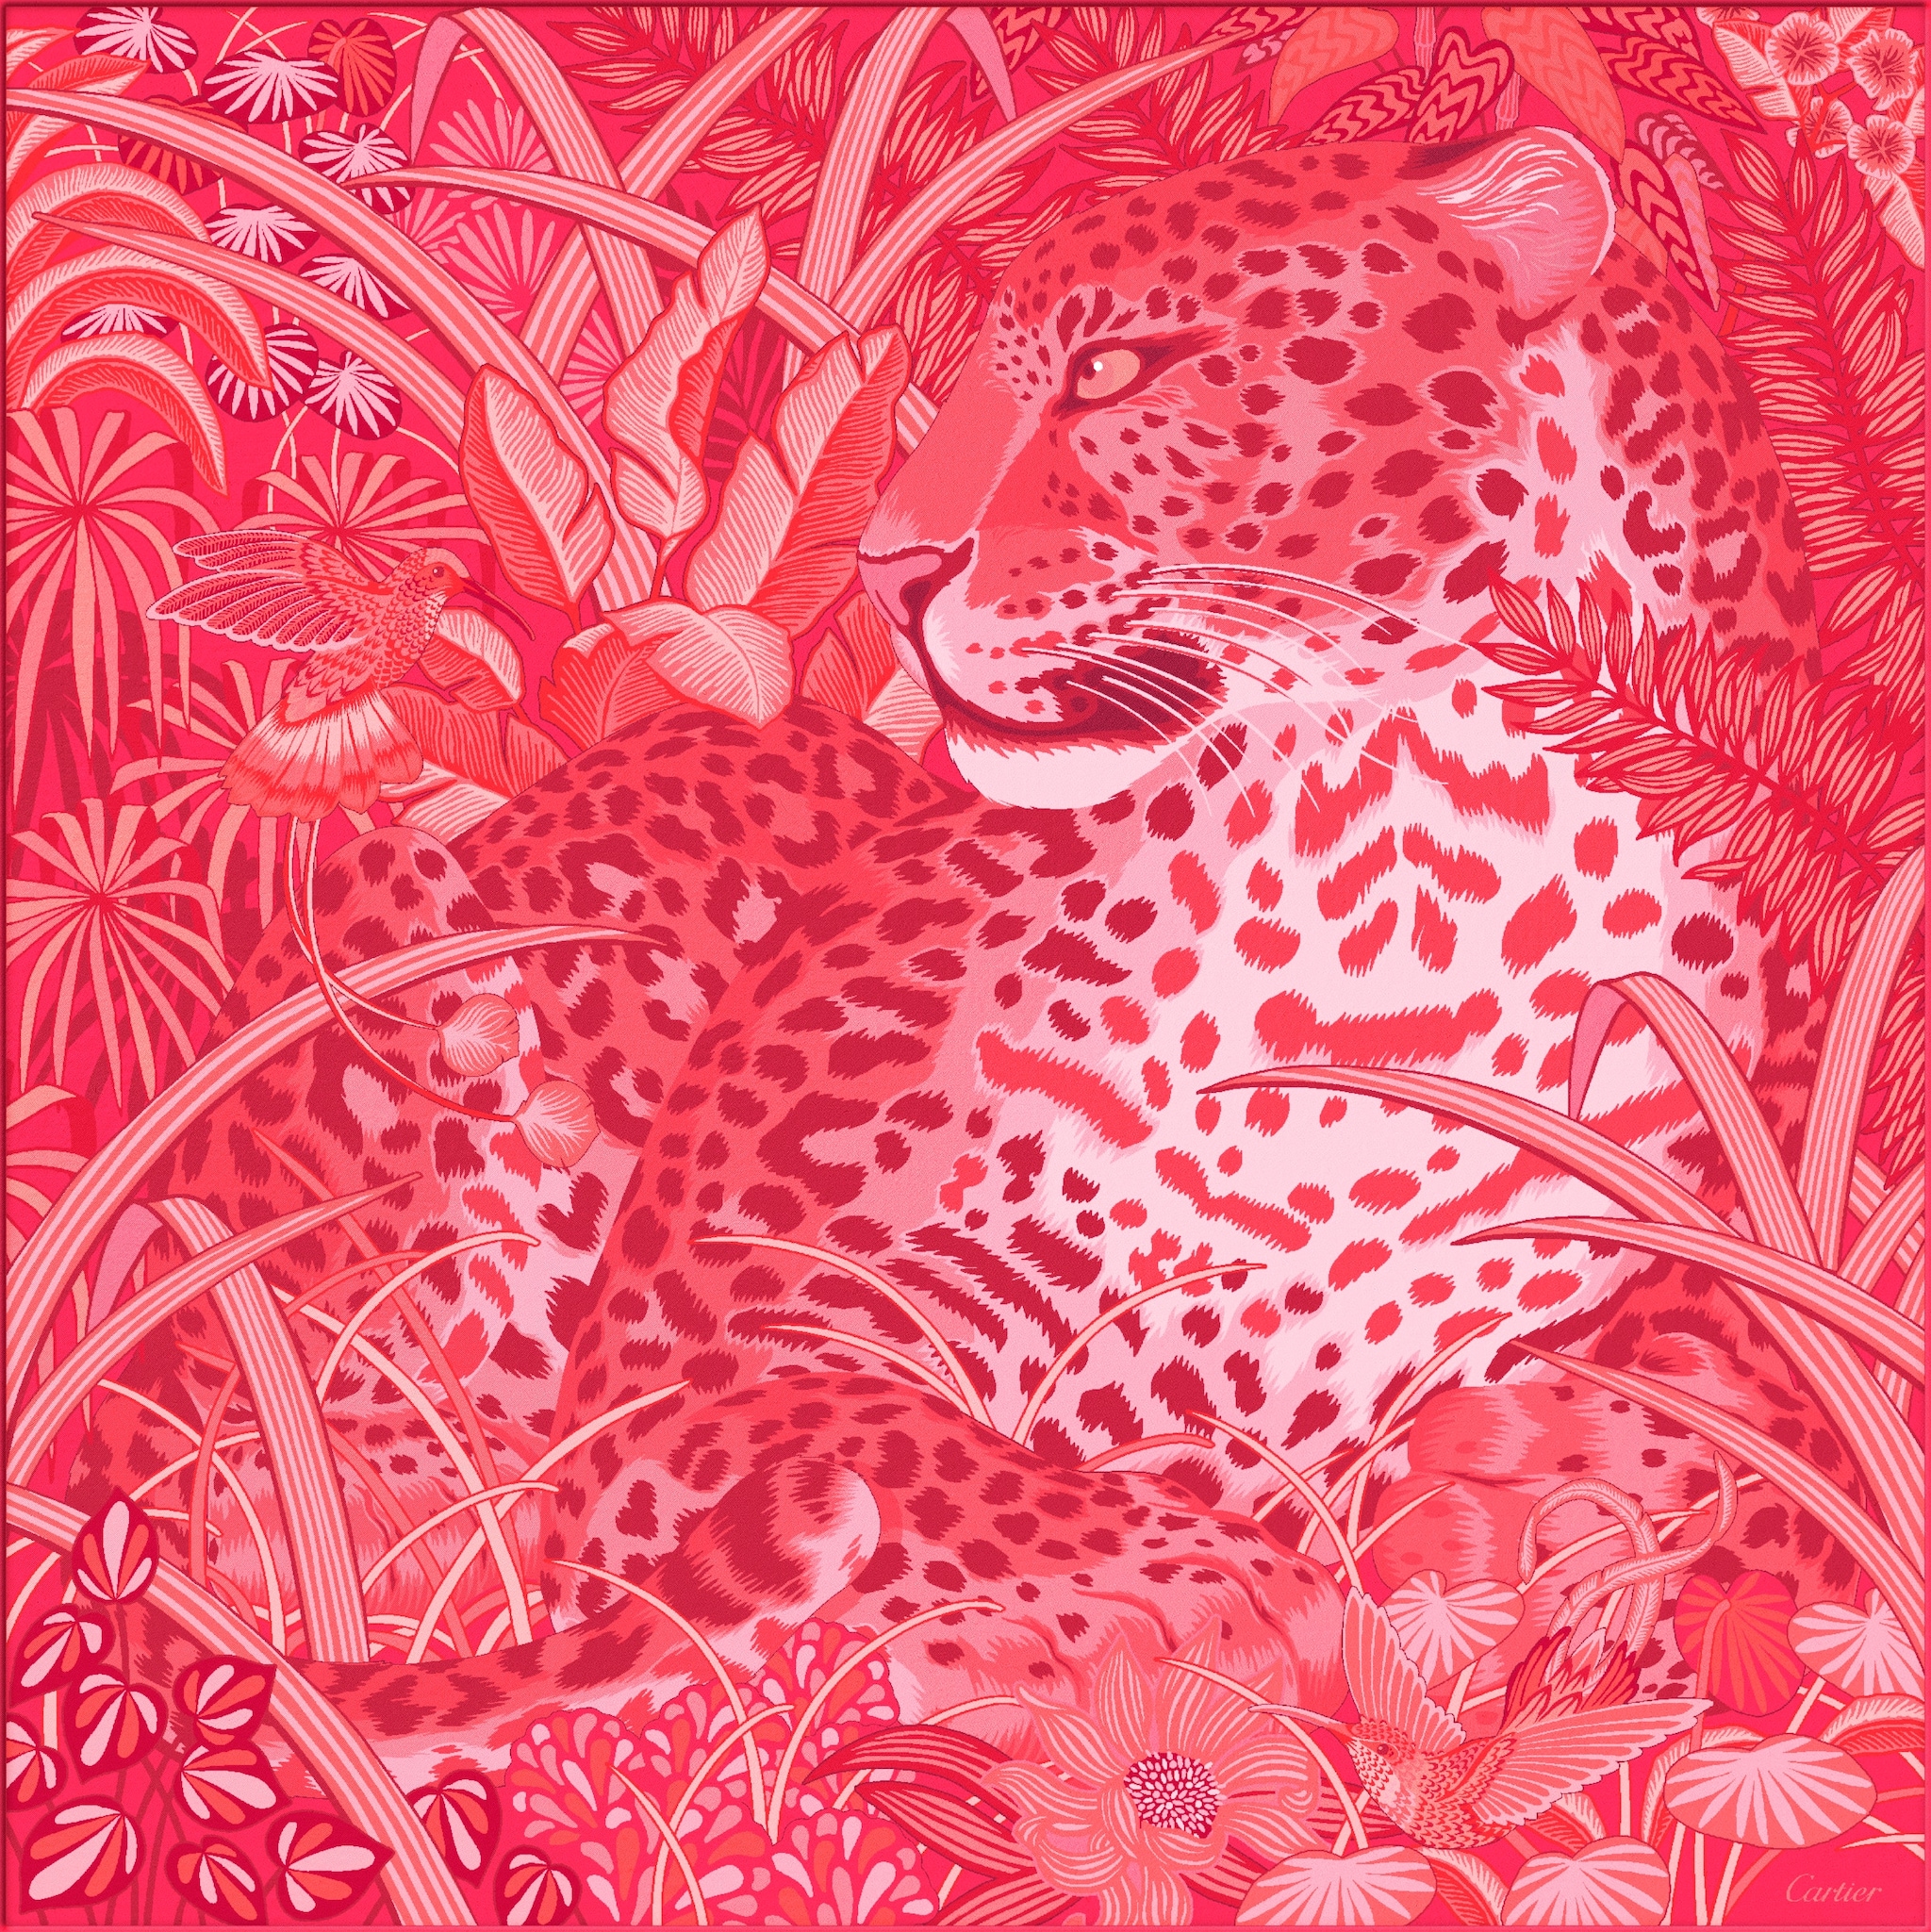 Panther in the Jungle 90 scarfCoral silk twill